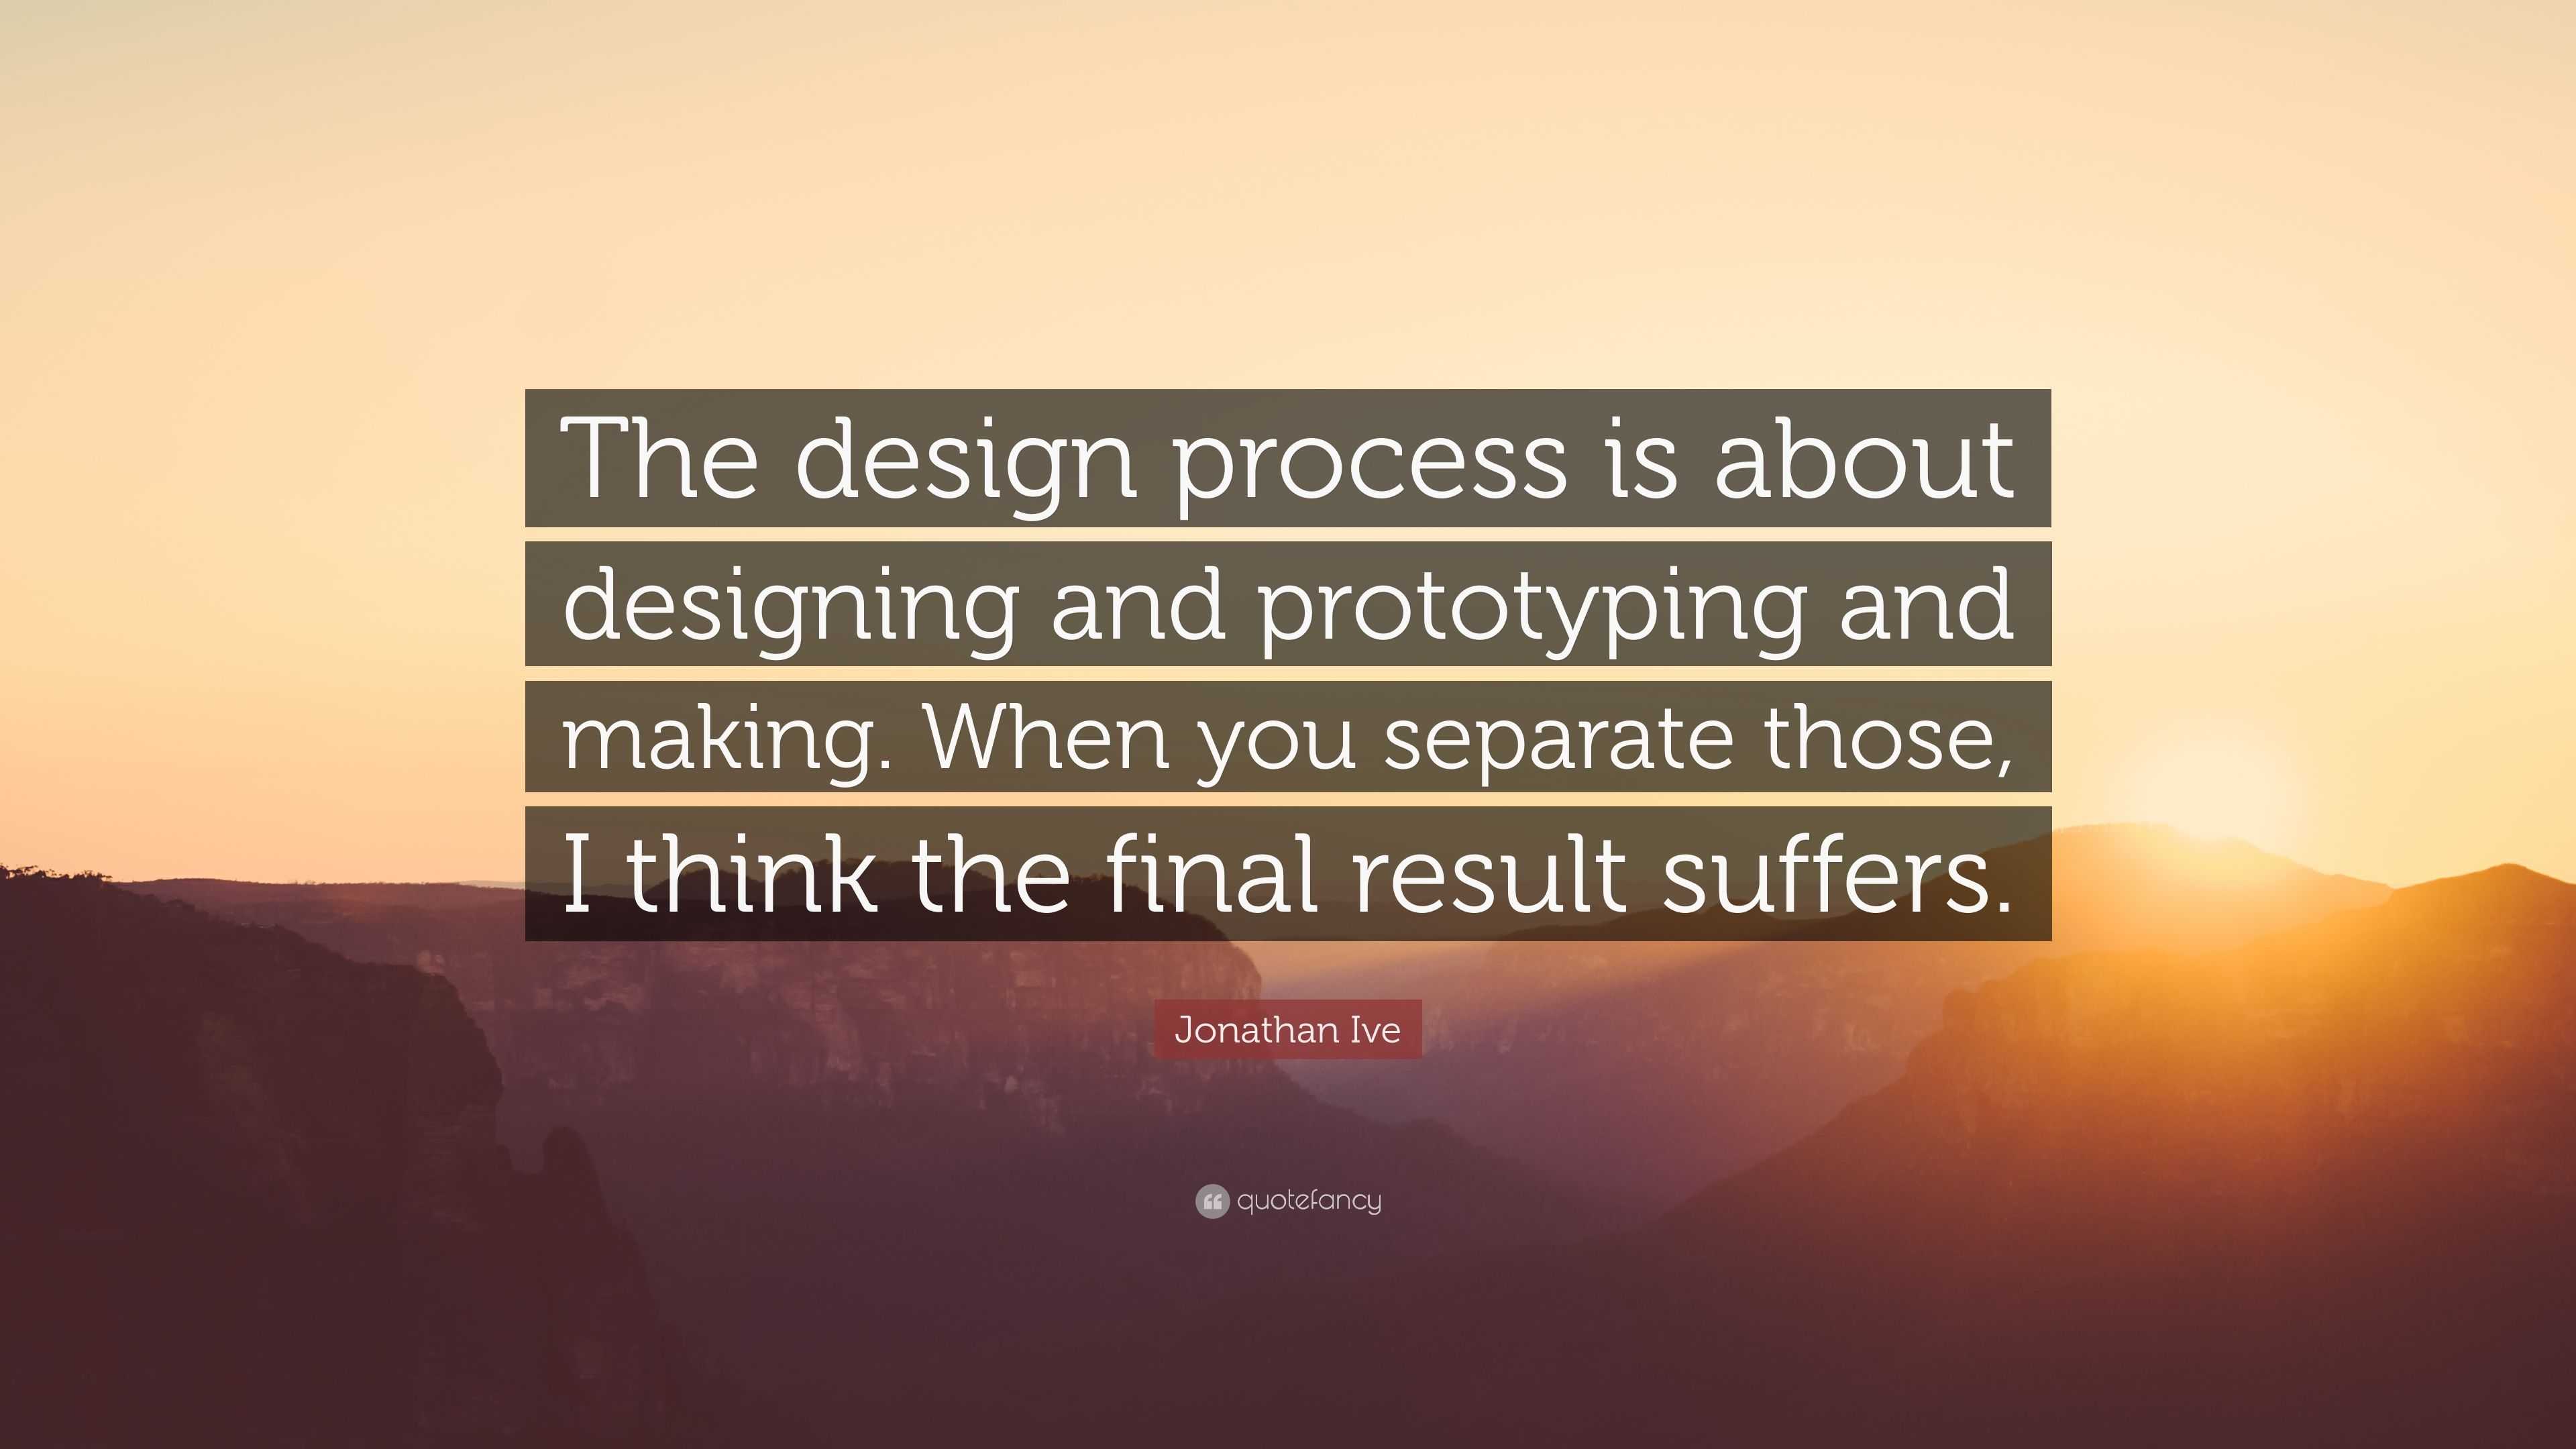 Jonathan Ive Quote: “The design process is about designing and